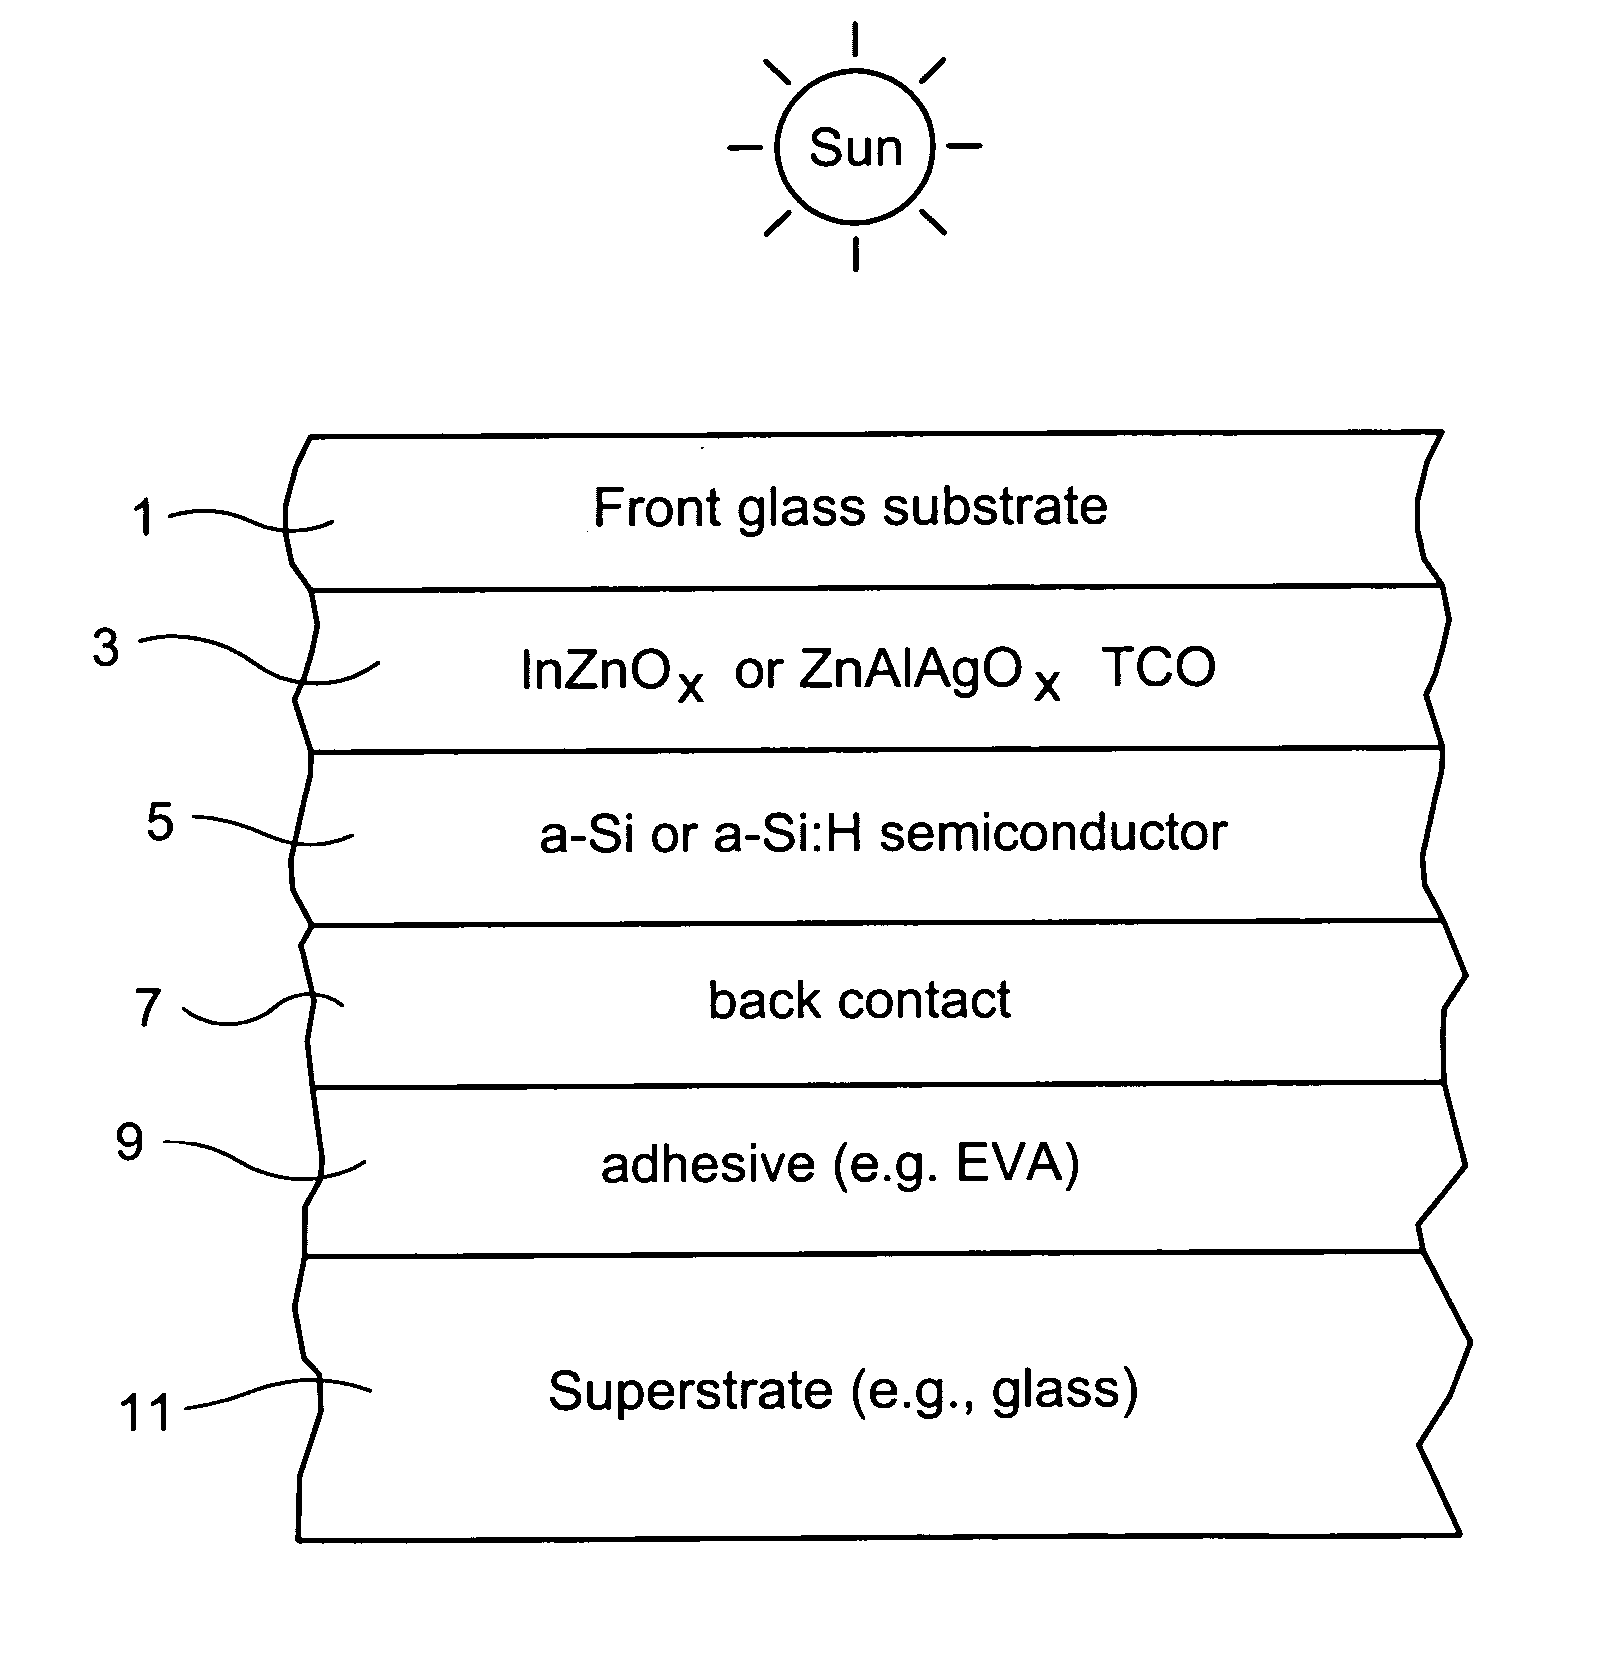 Indium zinc oxide based front contact for photovoltaic device and method of making same